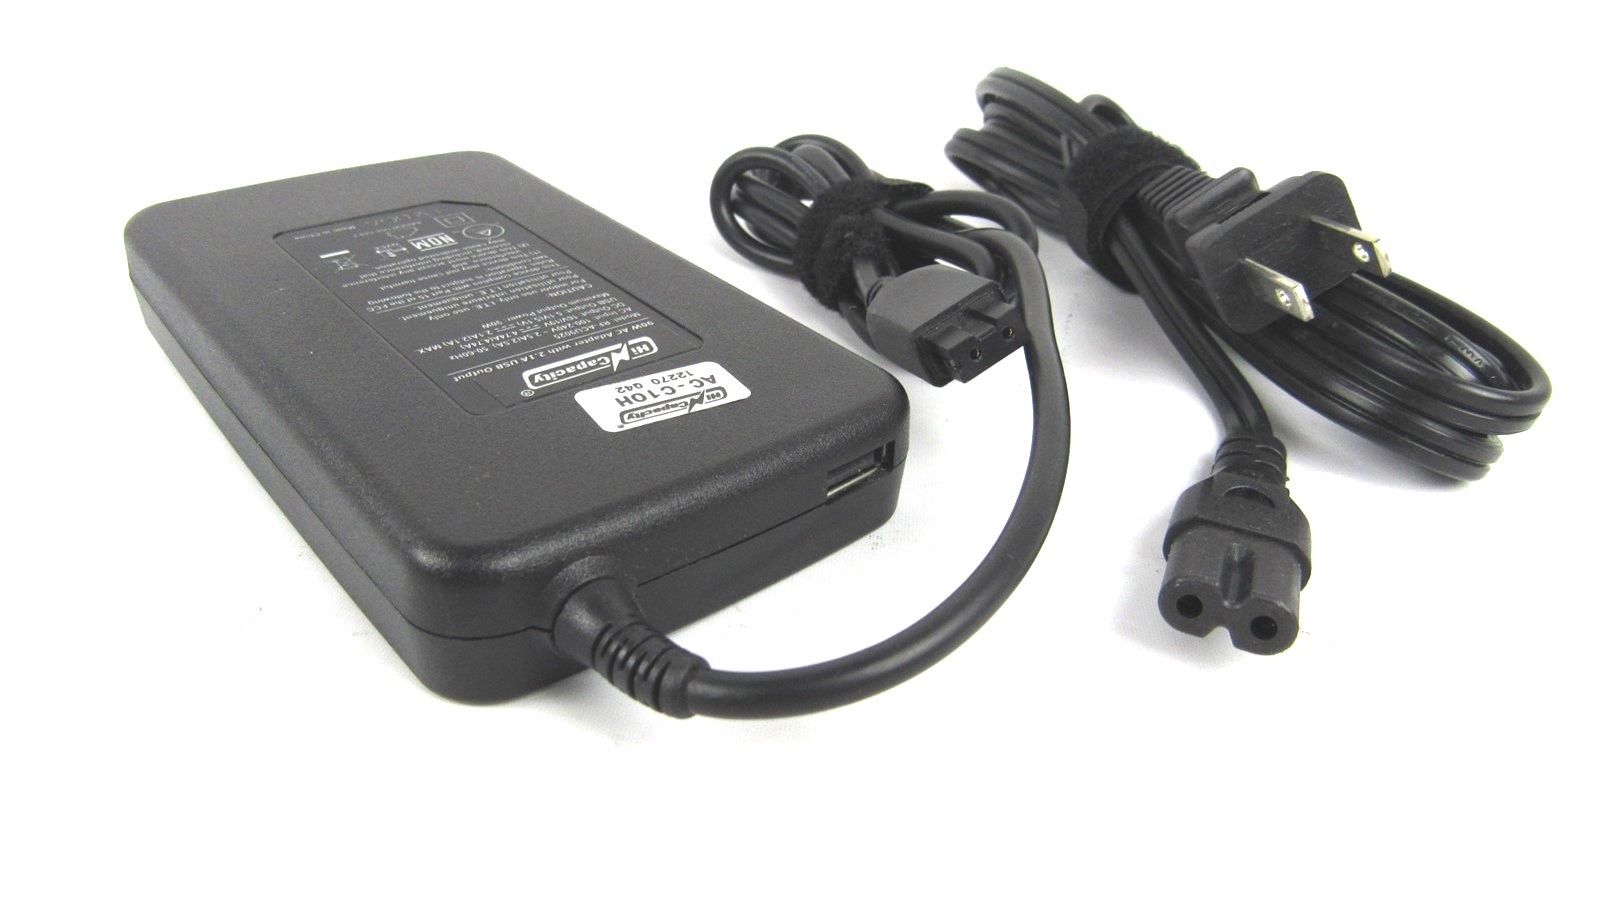 Universal AC Adapter w/ Power Cord for Laptops 19V 4.74A 90W RF-ACU9025 No Tips